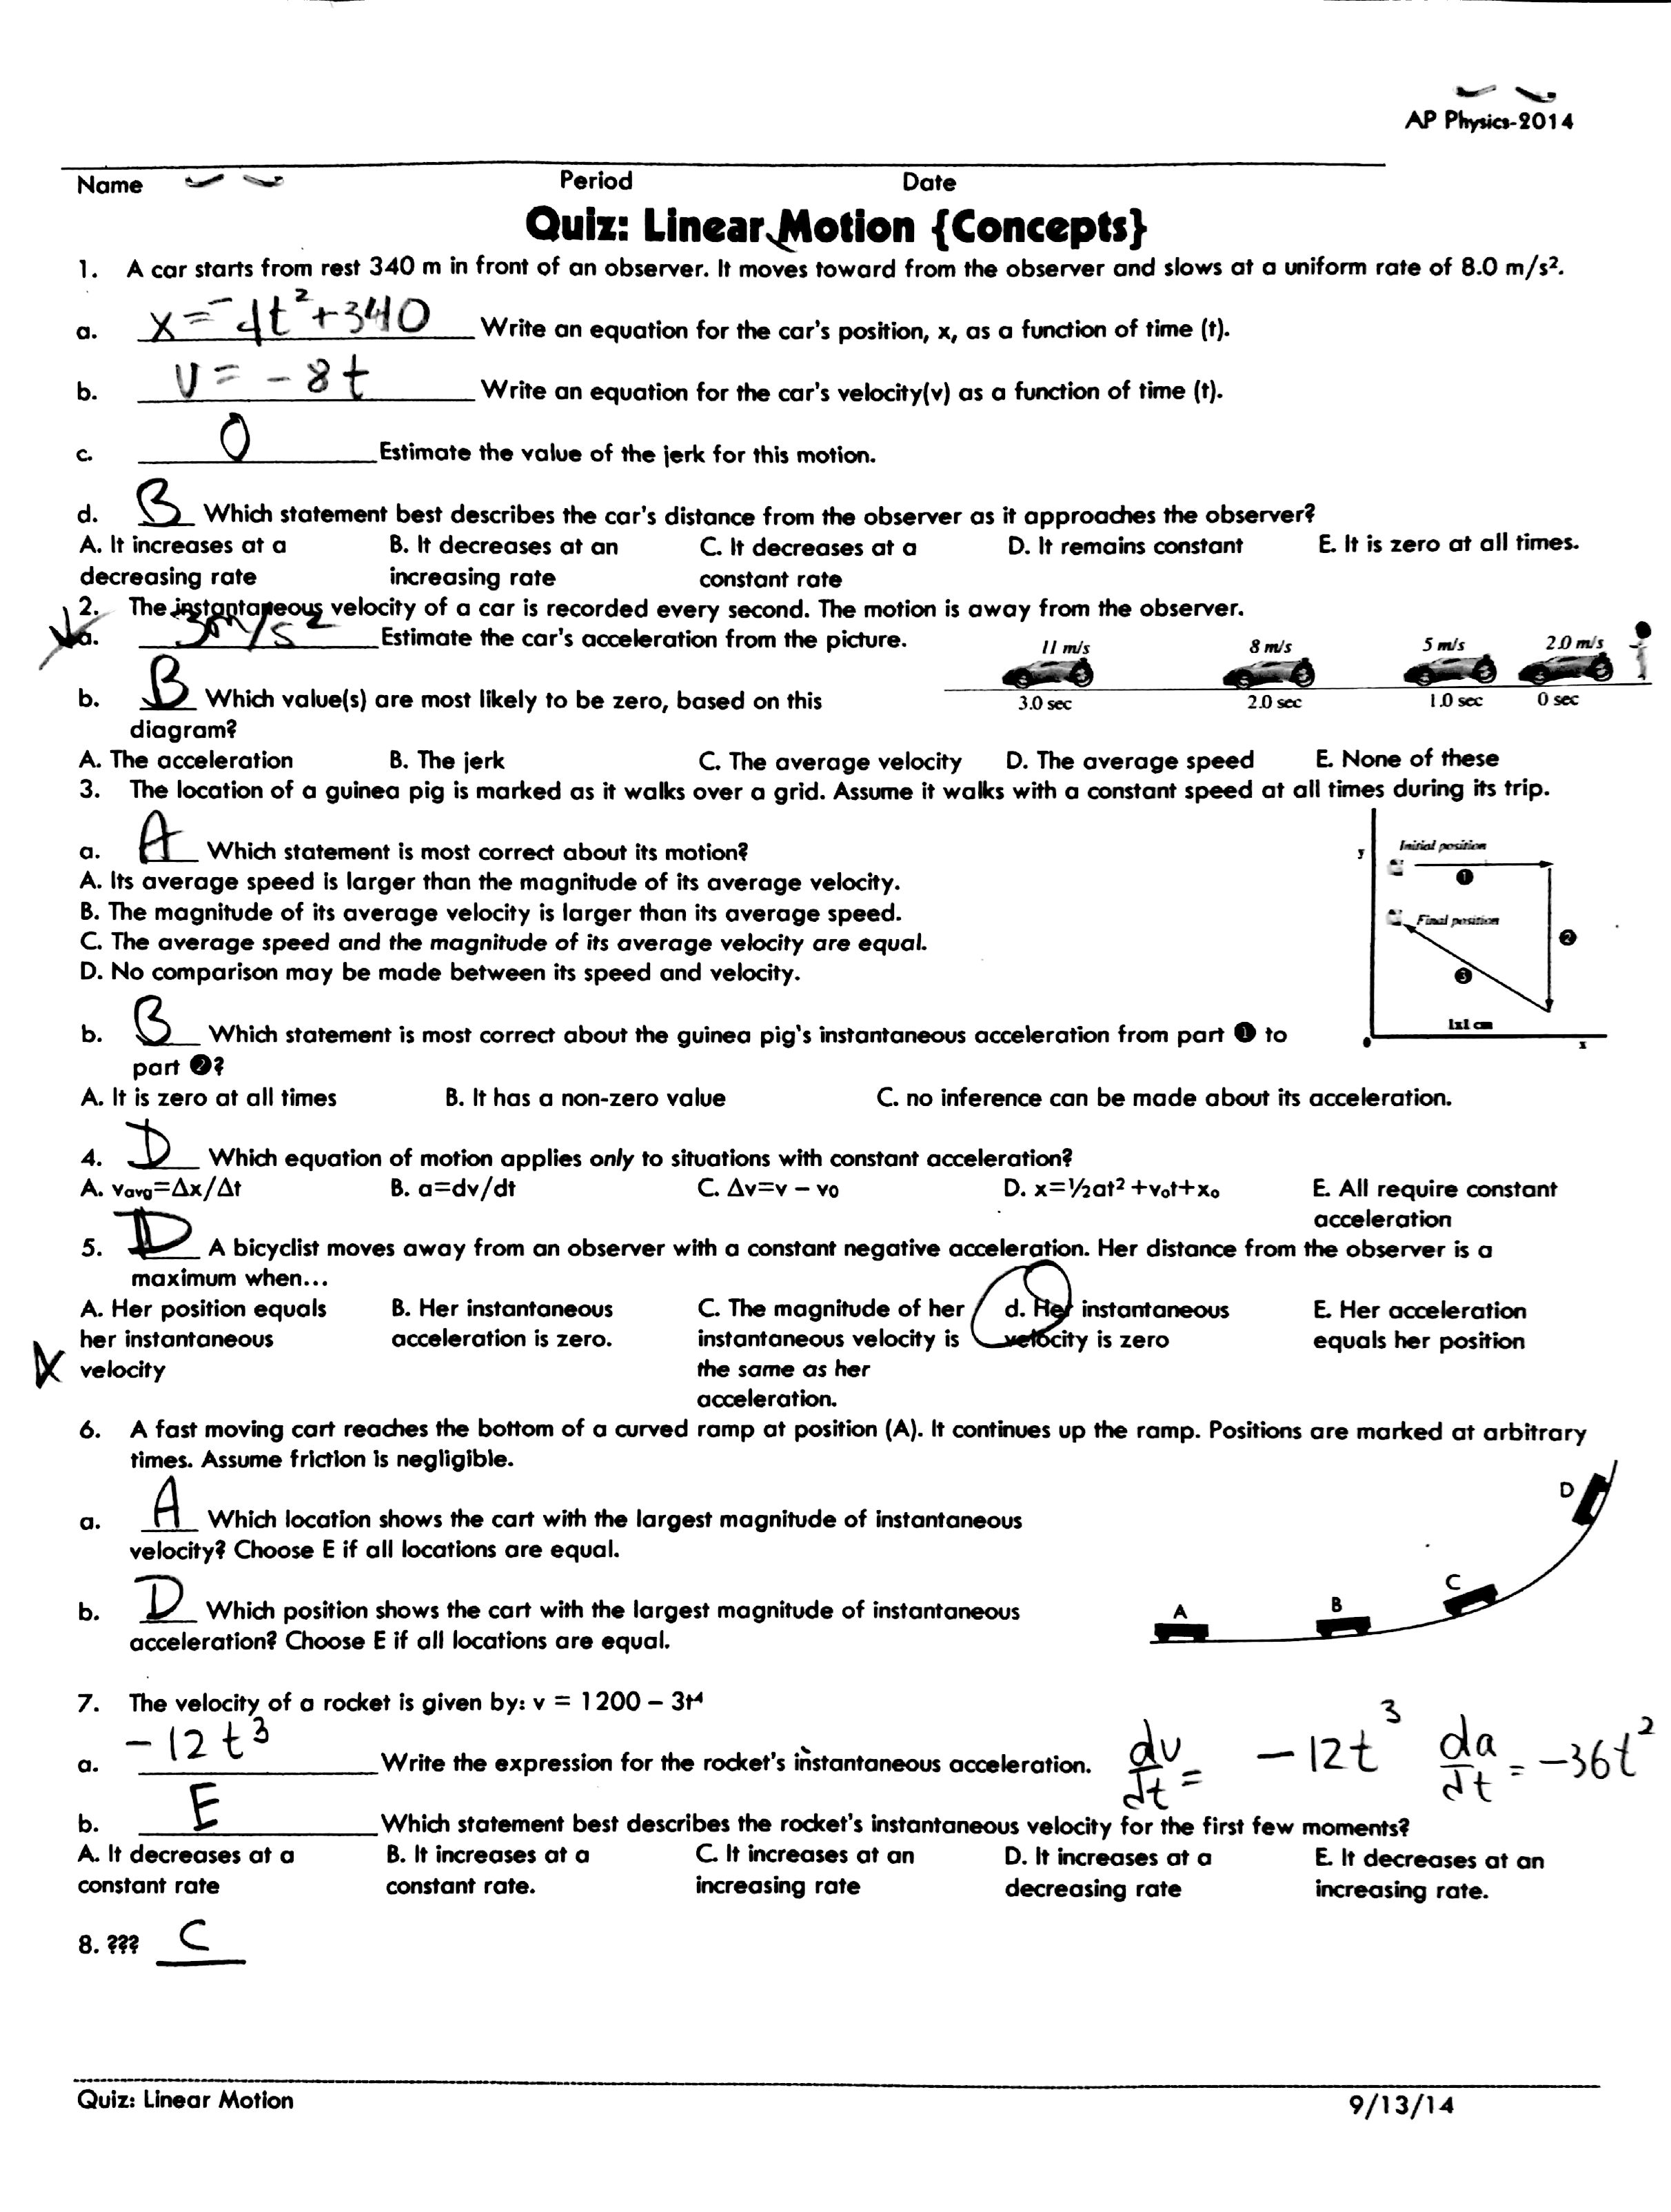 Conceptual Physics Worksheet Chapter 2 Linear Motion Image